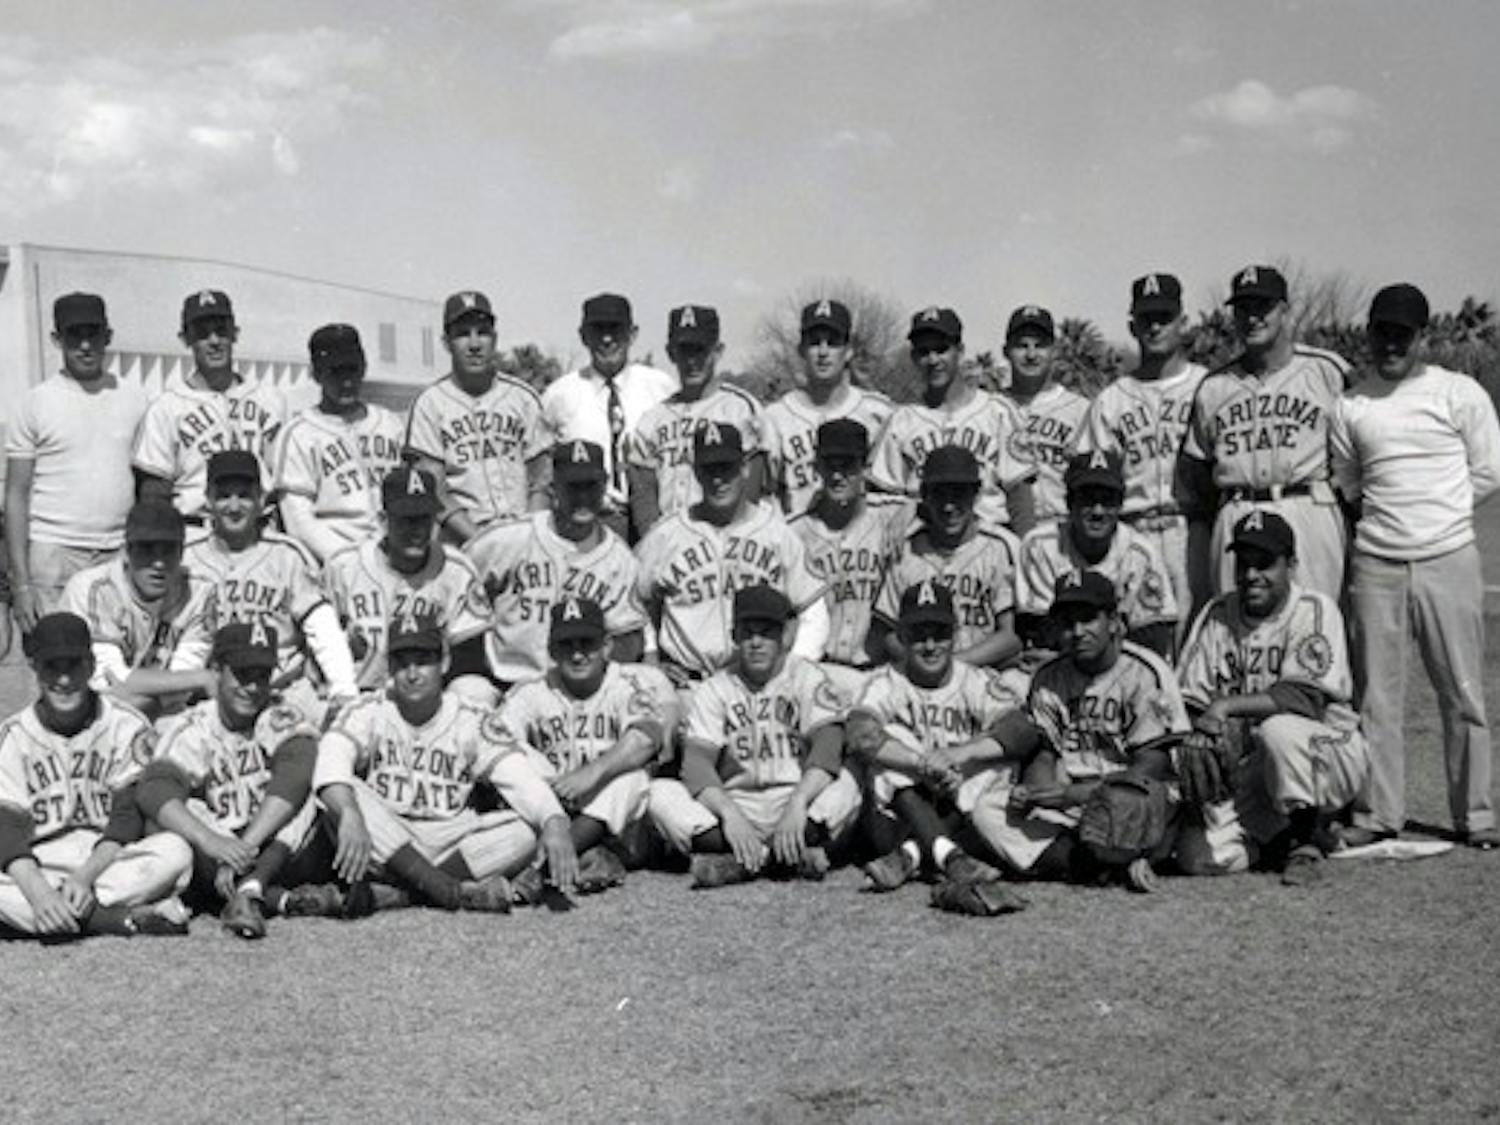 ASC 1955 baseball team, composed primarily of players from the 1954 season. Photo courtesy University Archives Photographs, Arizona State University Libraries.